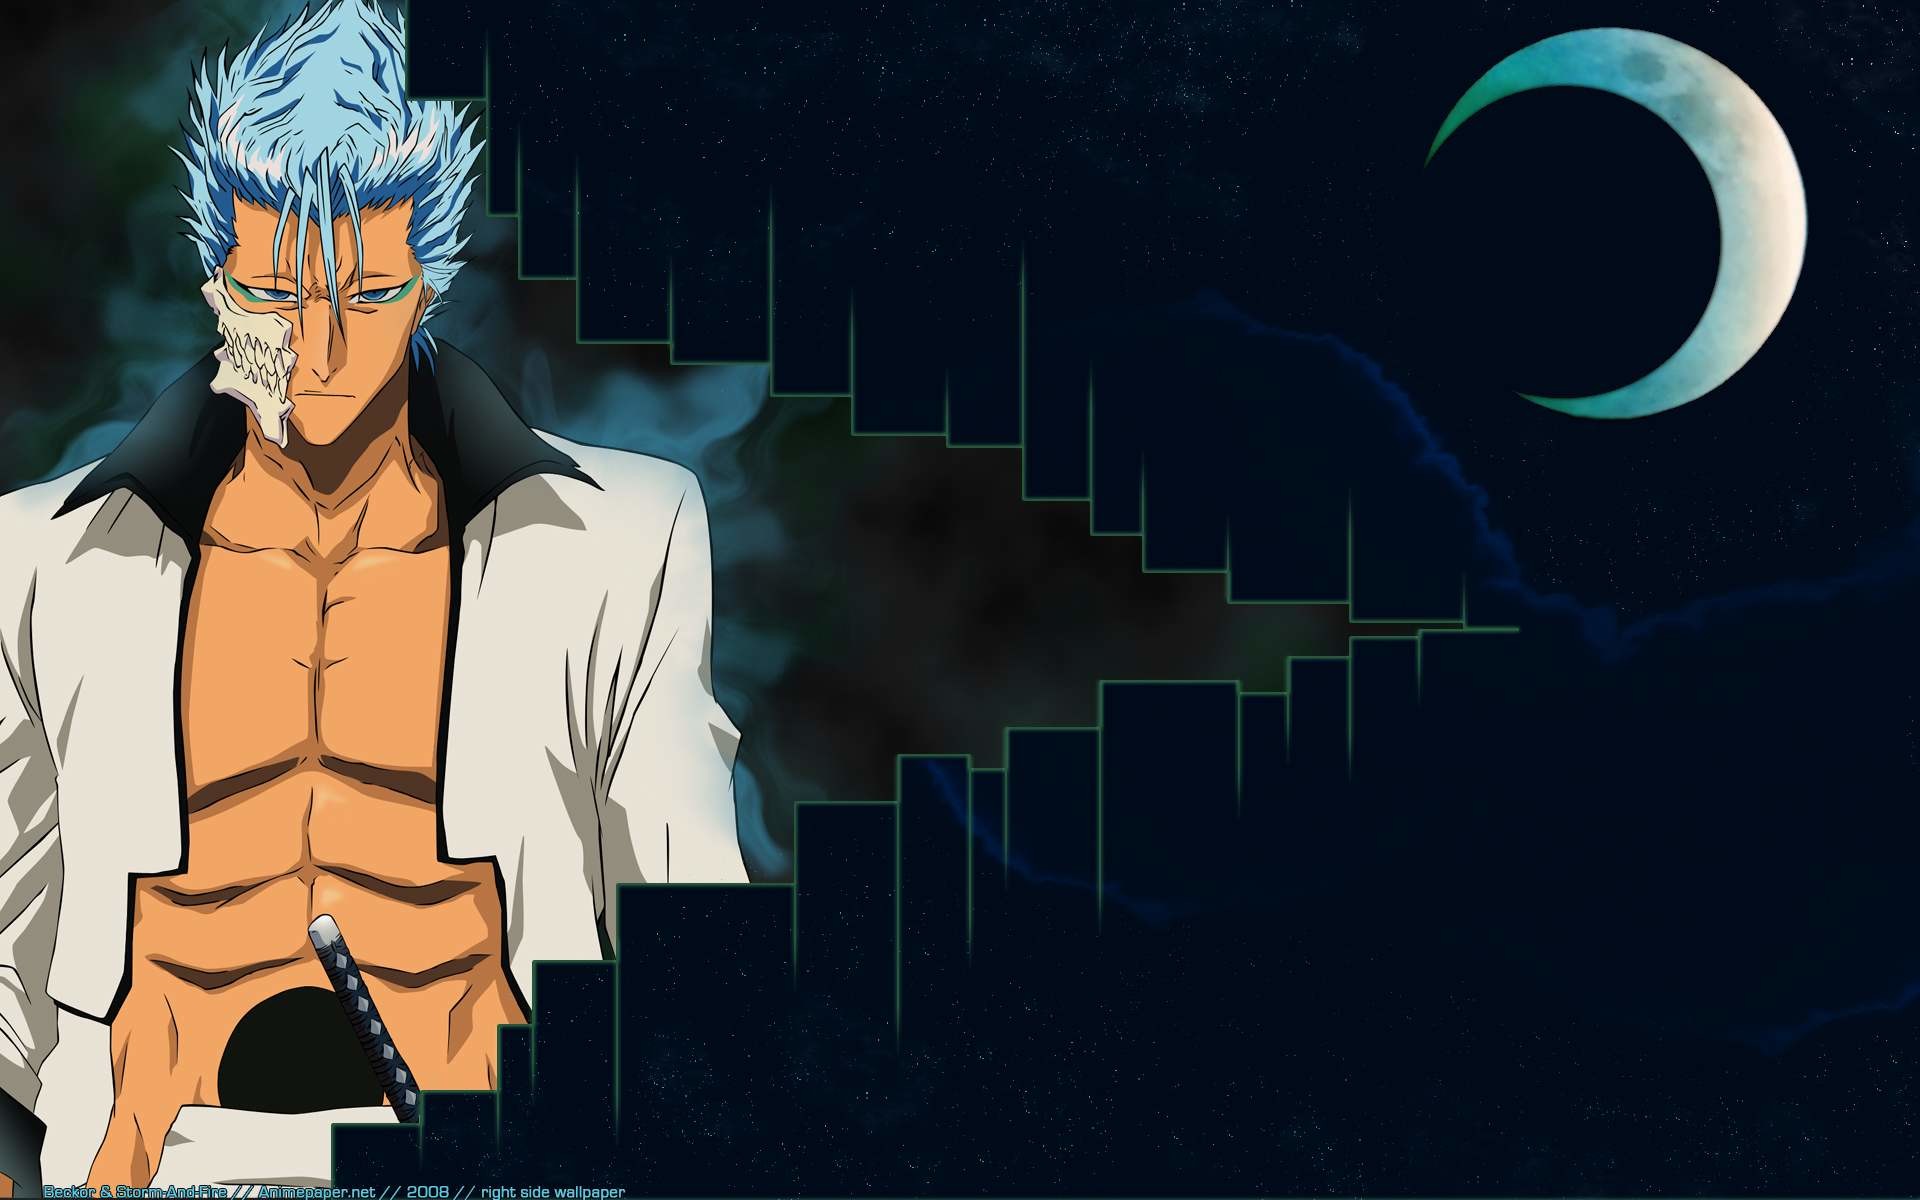 1920x1200 Download the Bleach anime wallpaper titled: 'Grimmjow Jaegerjaquez'.